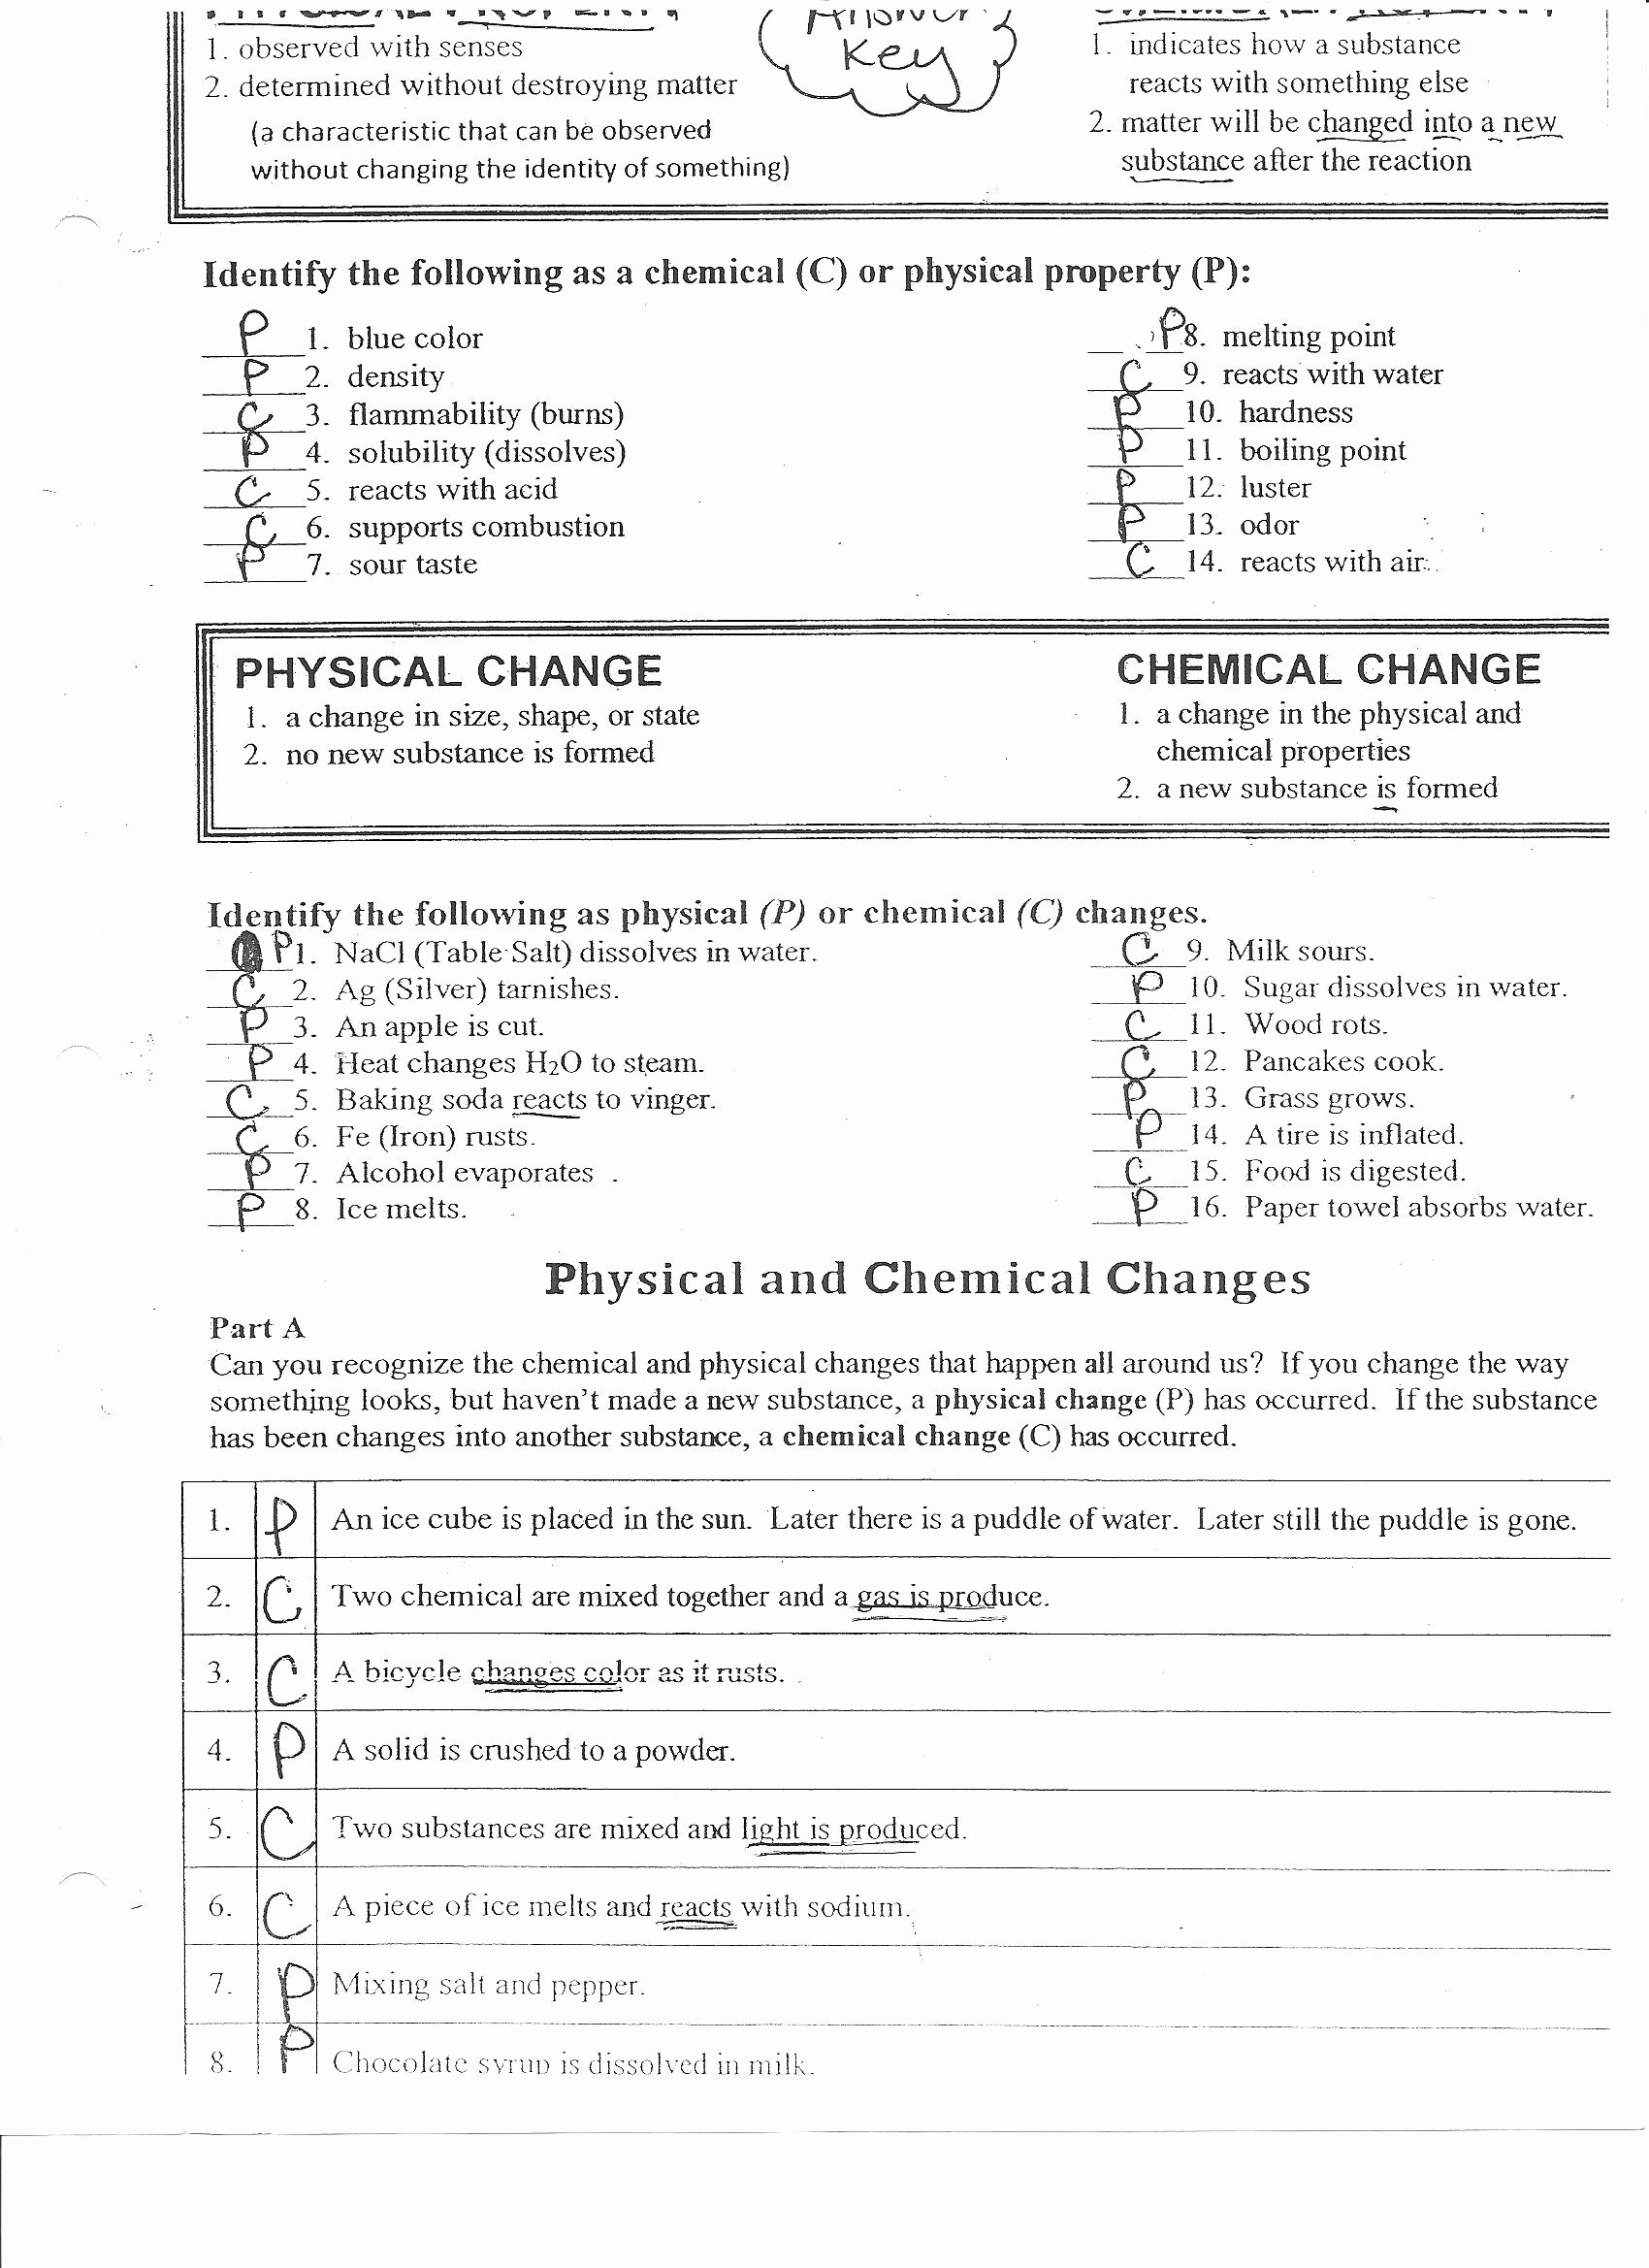 Physical Vs Chemical Properties Worksheet Awesome Chemistry Worksheets for Grade 9